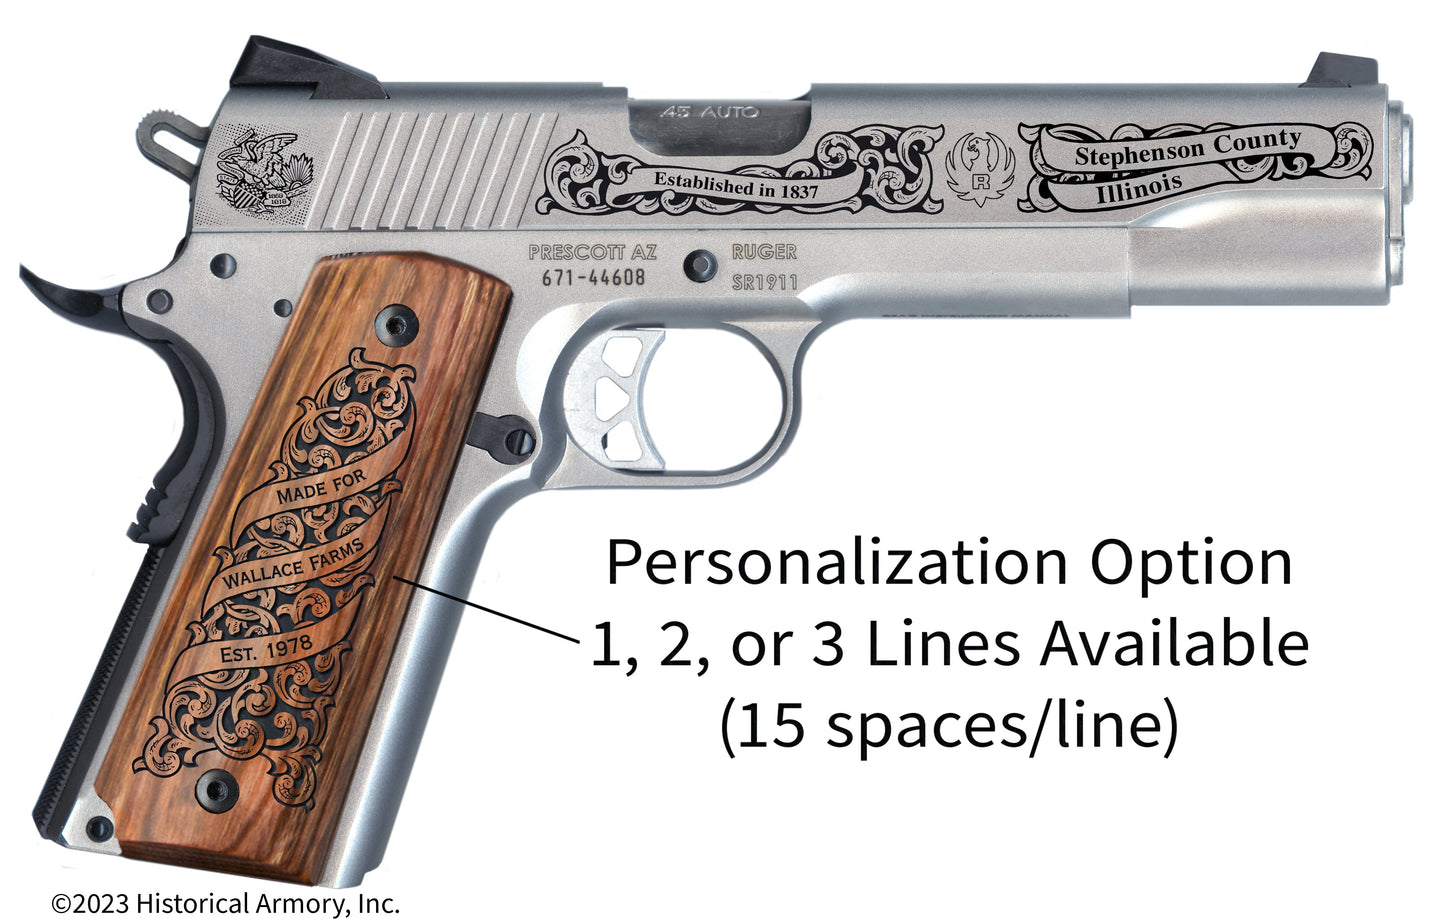 Stephenson County Illinois Personalized Engraved .45 Auto Ruger 1911